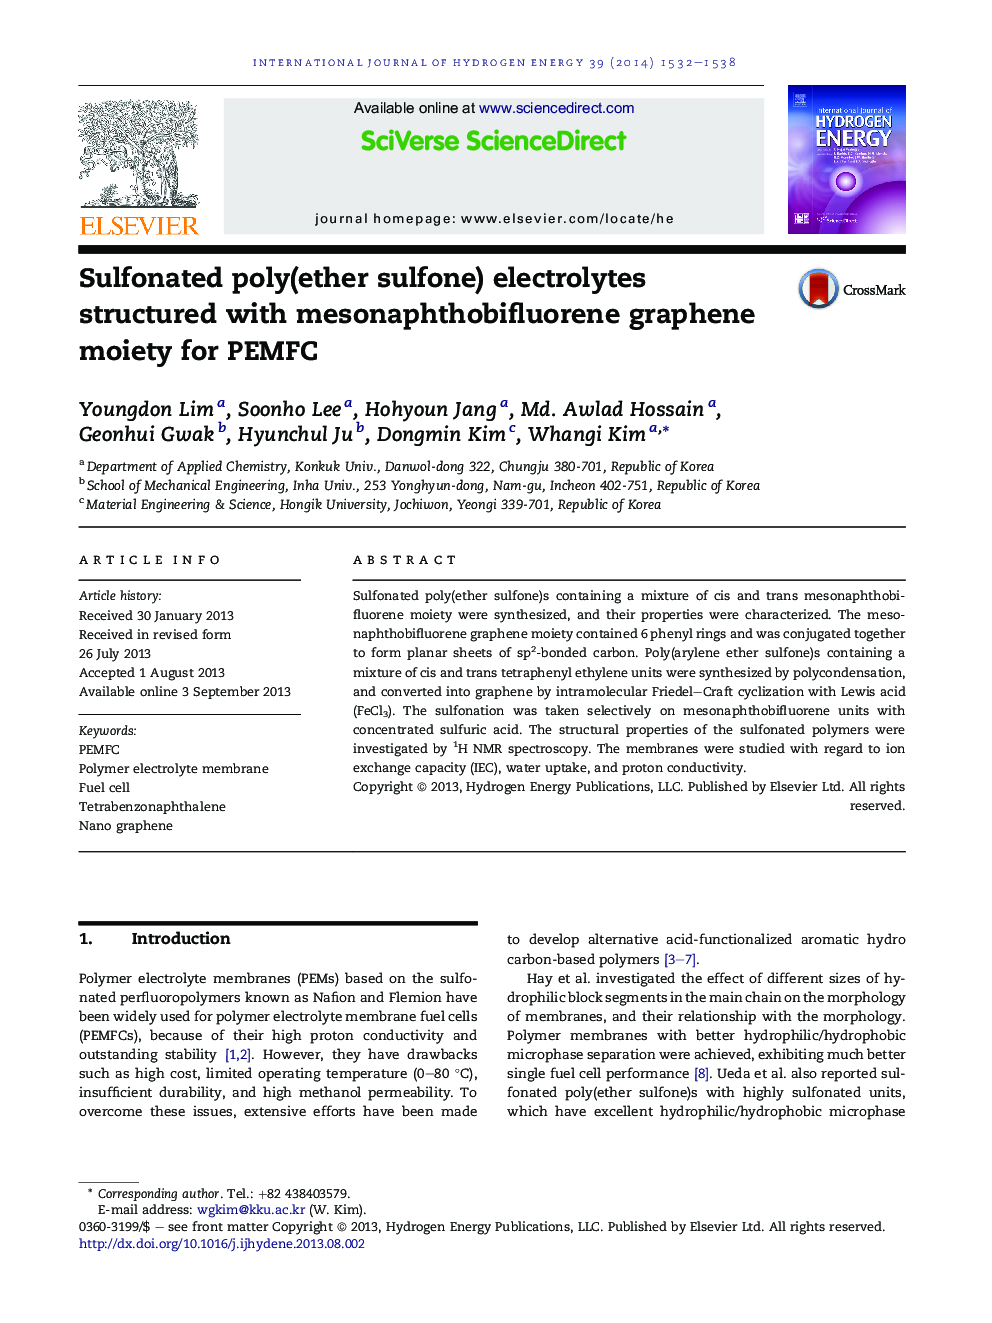 Sulfonated poly(ether sulfone) electrolytes structured with mesonaphthobifluorene graphene moiety for PEMFC